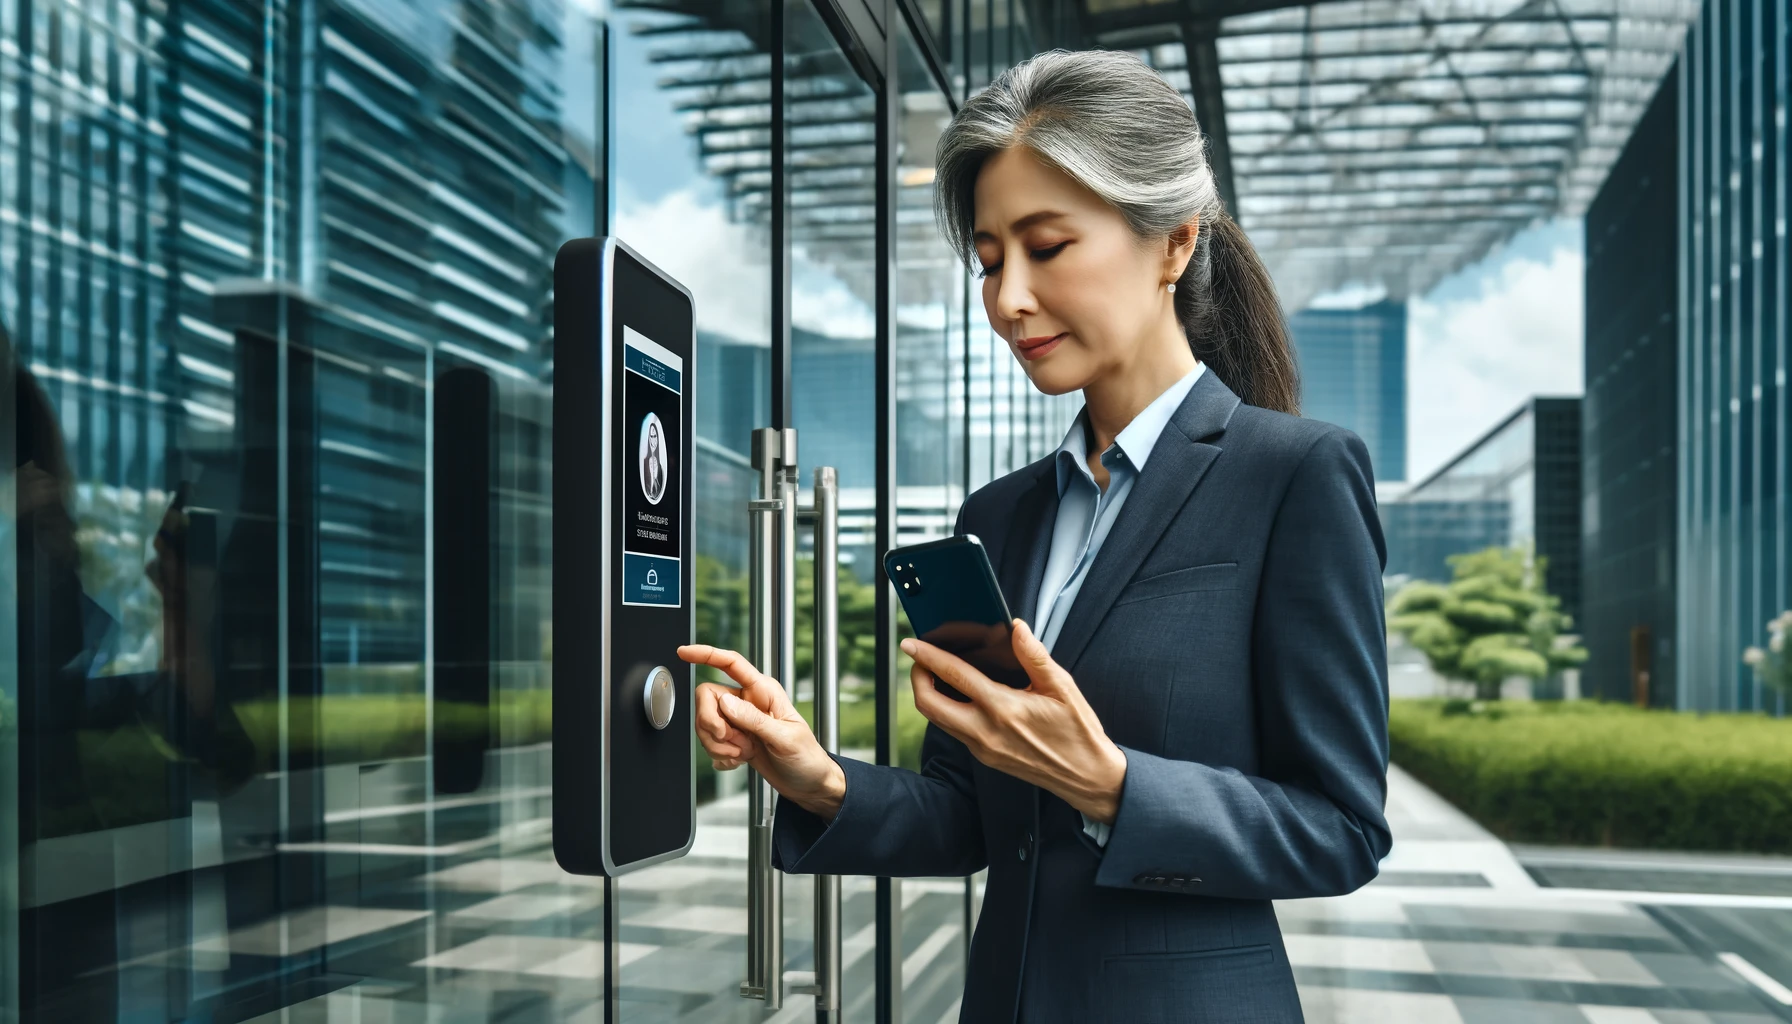 Revolutionizing Access Control: How University Campuses are Leading the Way in Security Innovation Through Mobile Technology Advancements